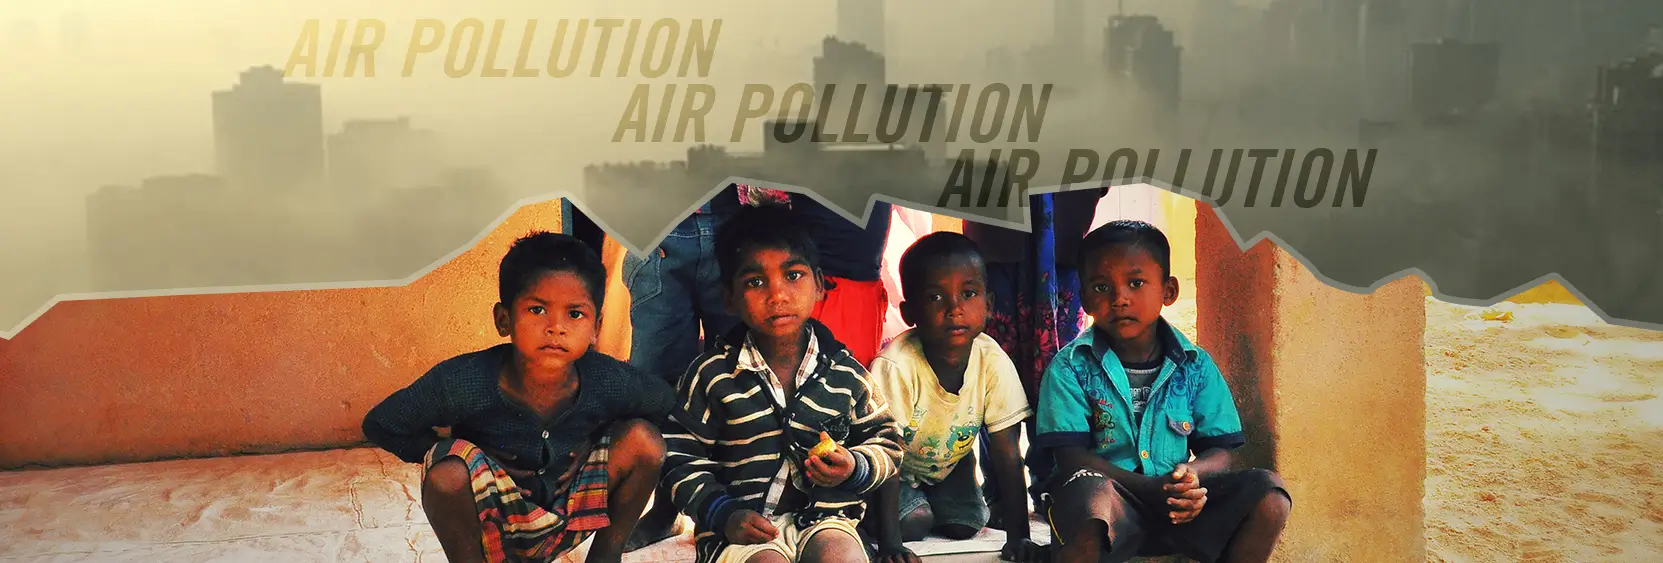 AIR-POLLUTION_Article-banner-copy